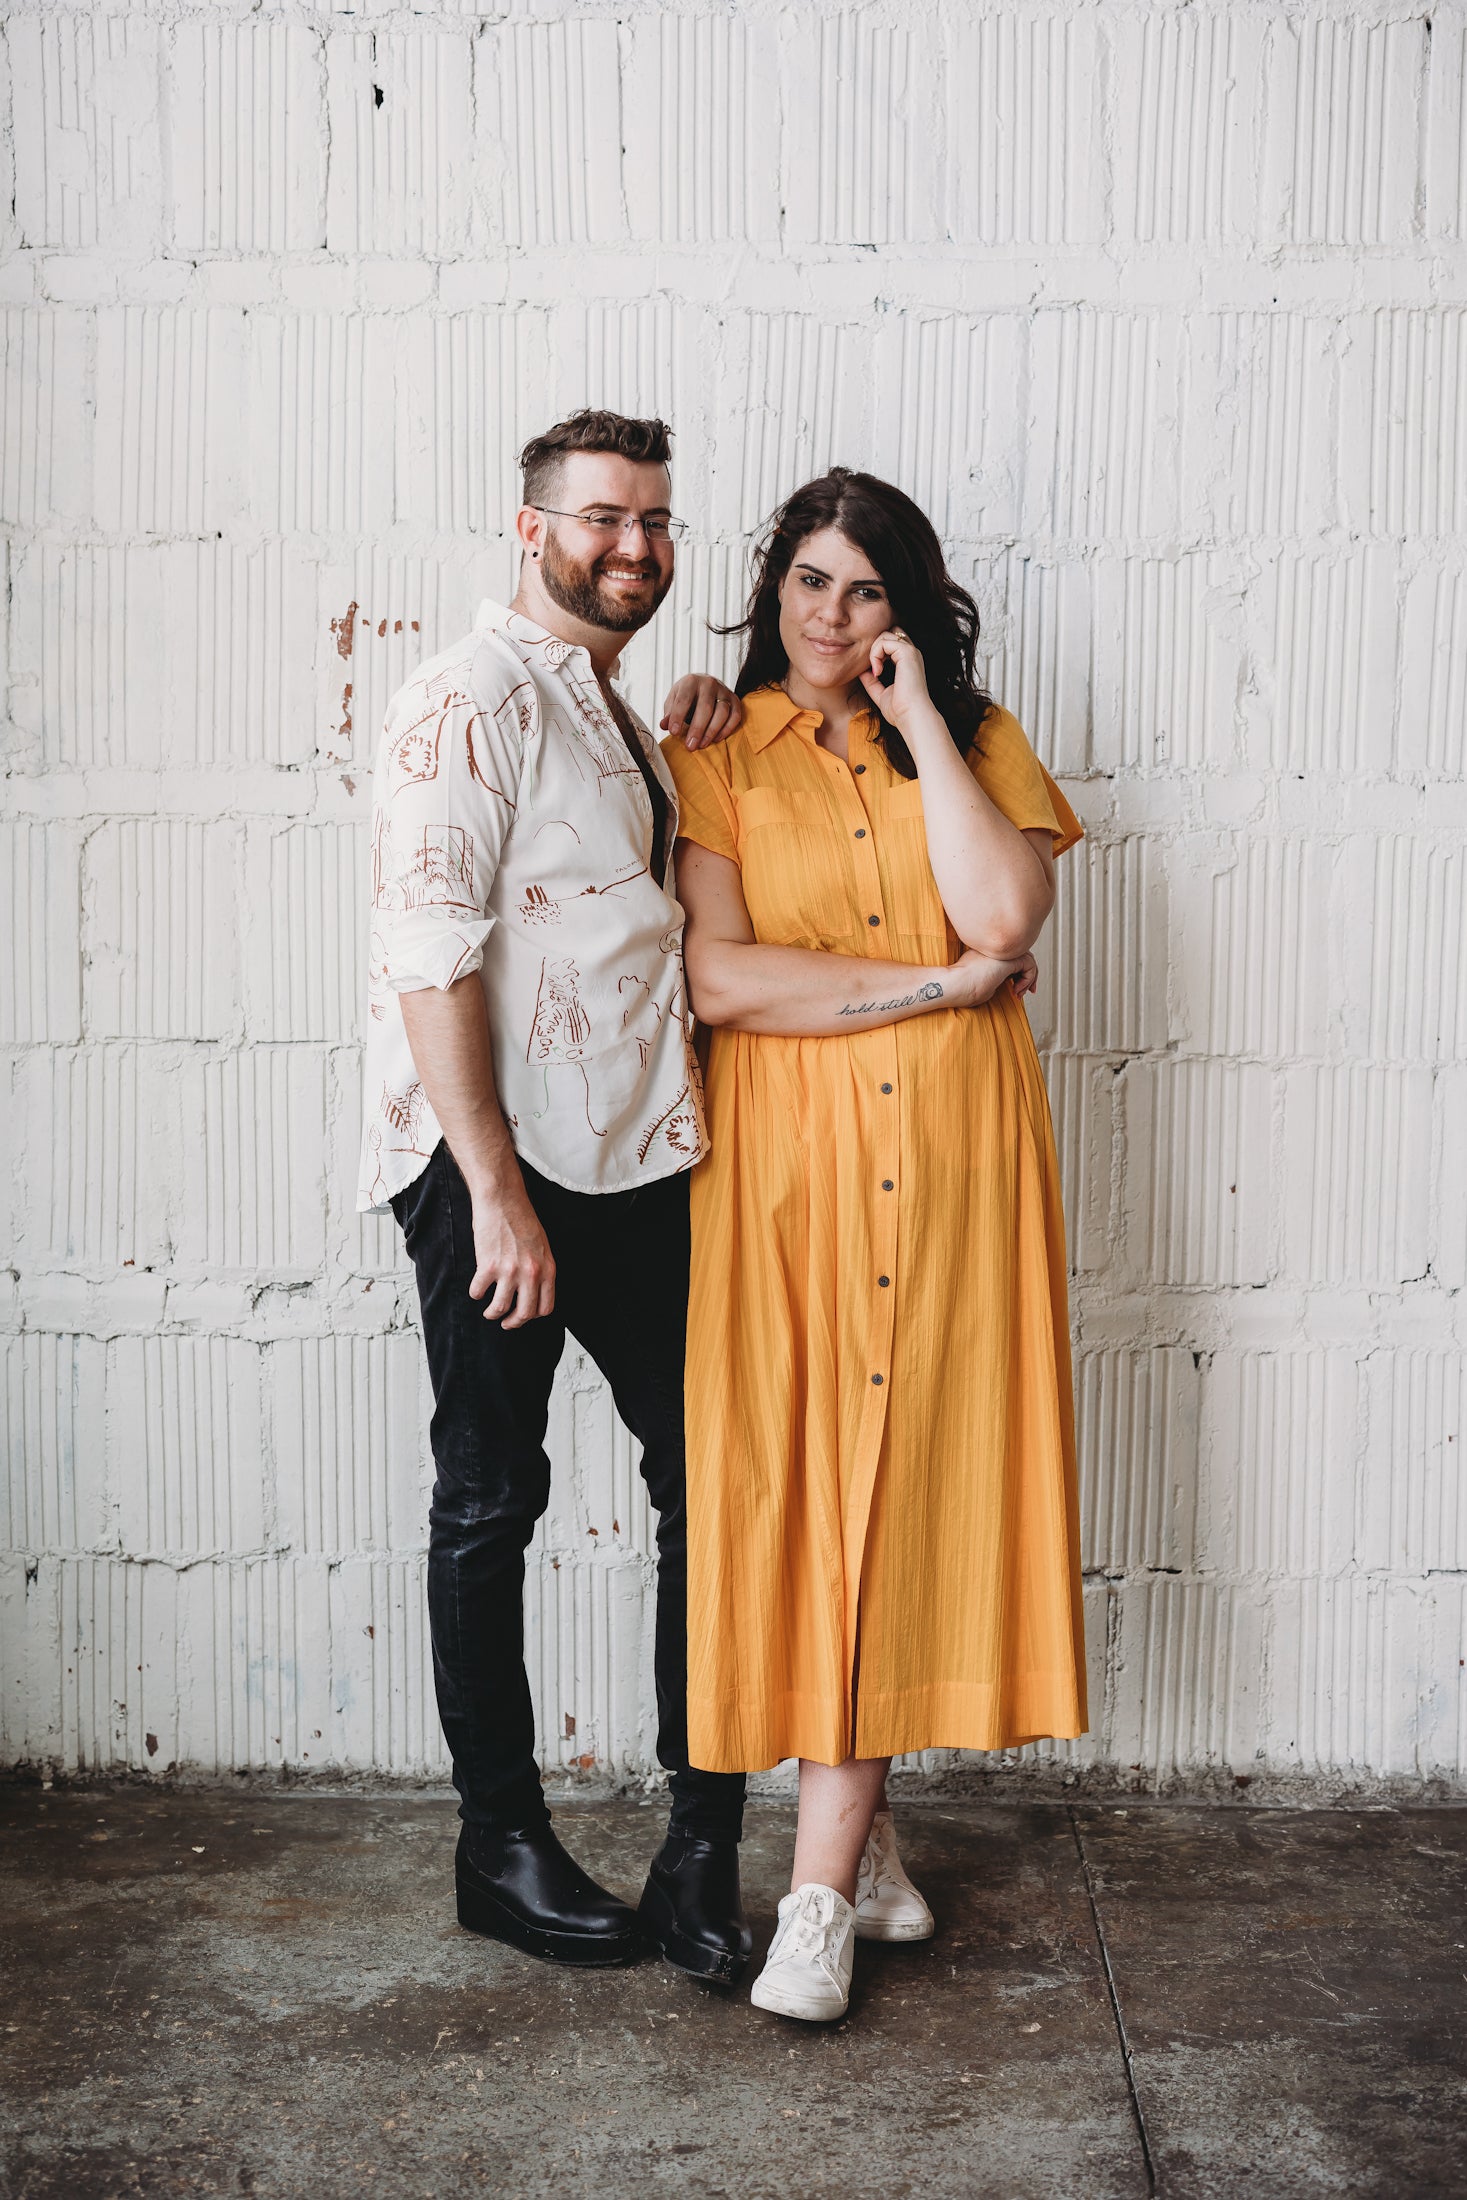 robbie stands on the left facing inwards. he is wearing glasses and has on a white button down with line drawings on it paired with black jeans. His hand rests on Mary's shoulder. Mary is wearing a long, tangerine button-up shirtdress with white sneakers